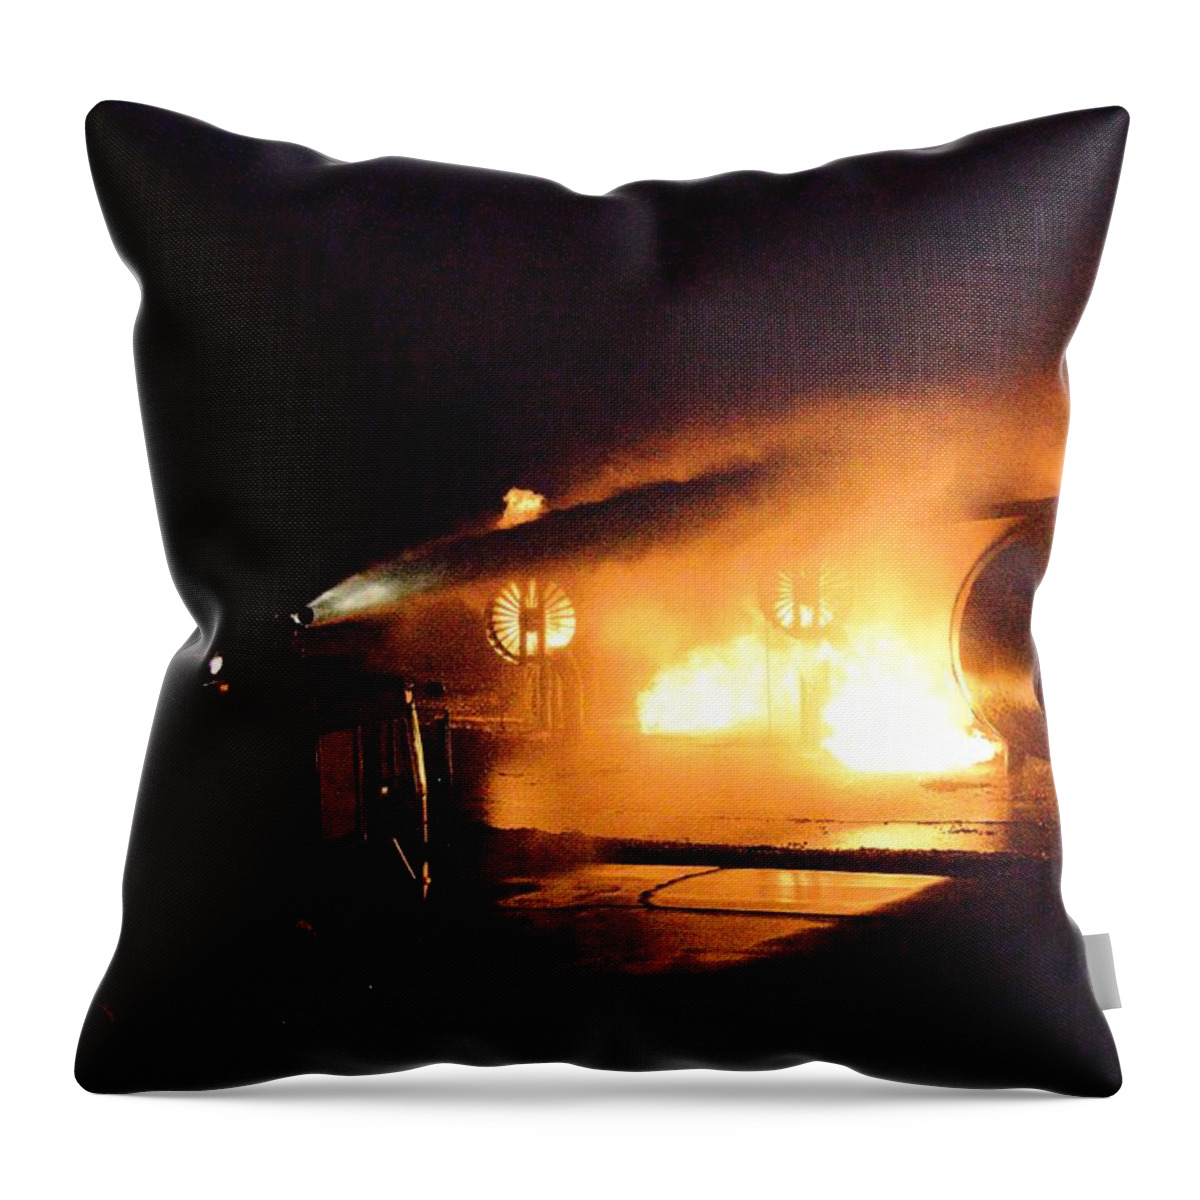 Fire Throw Pillow featuring the photograph Plane Burning by Aaron Martens